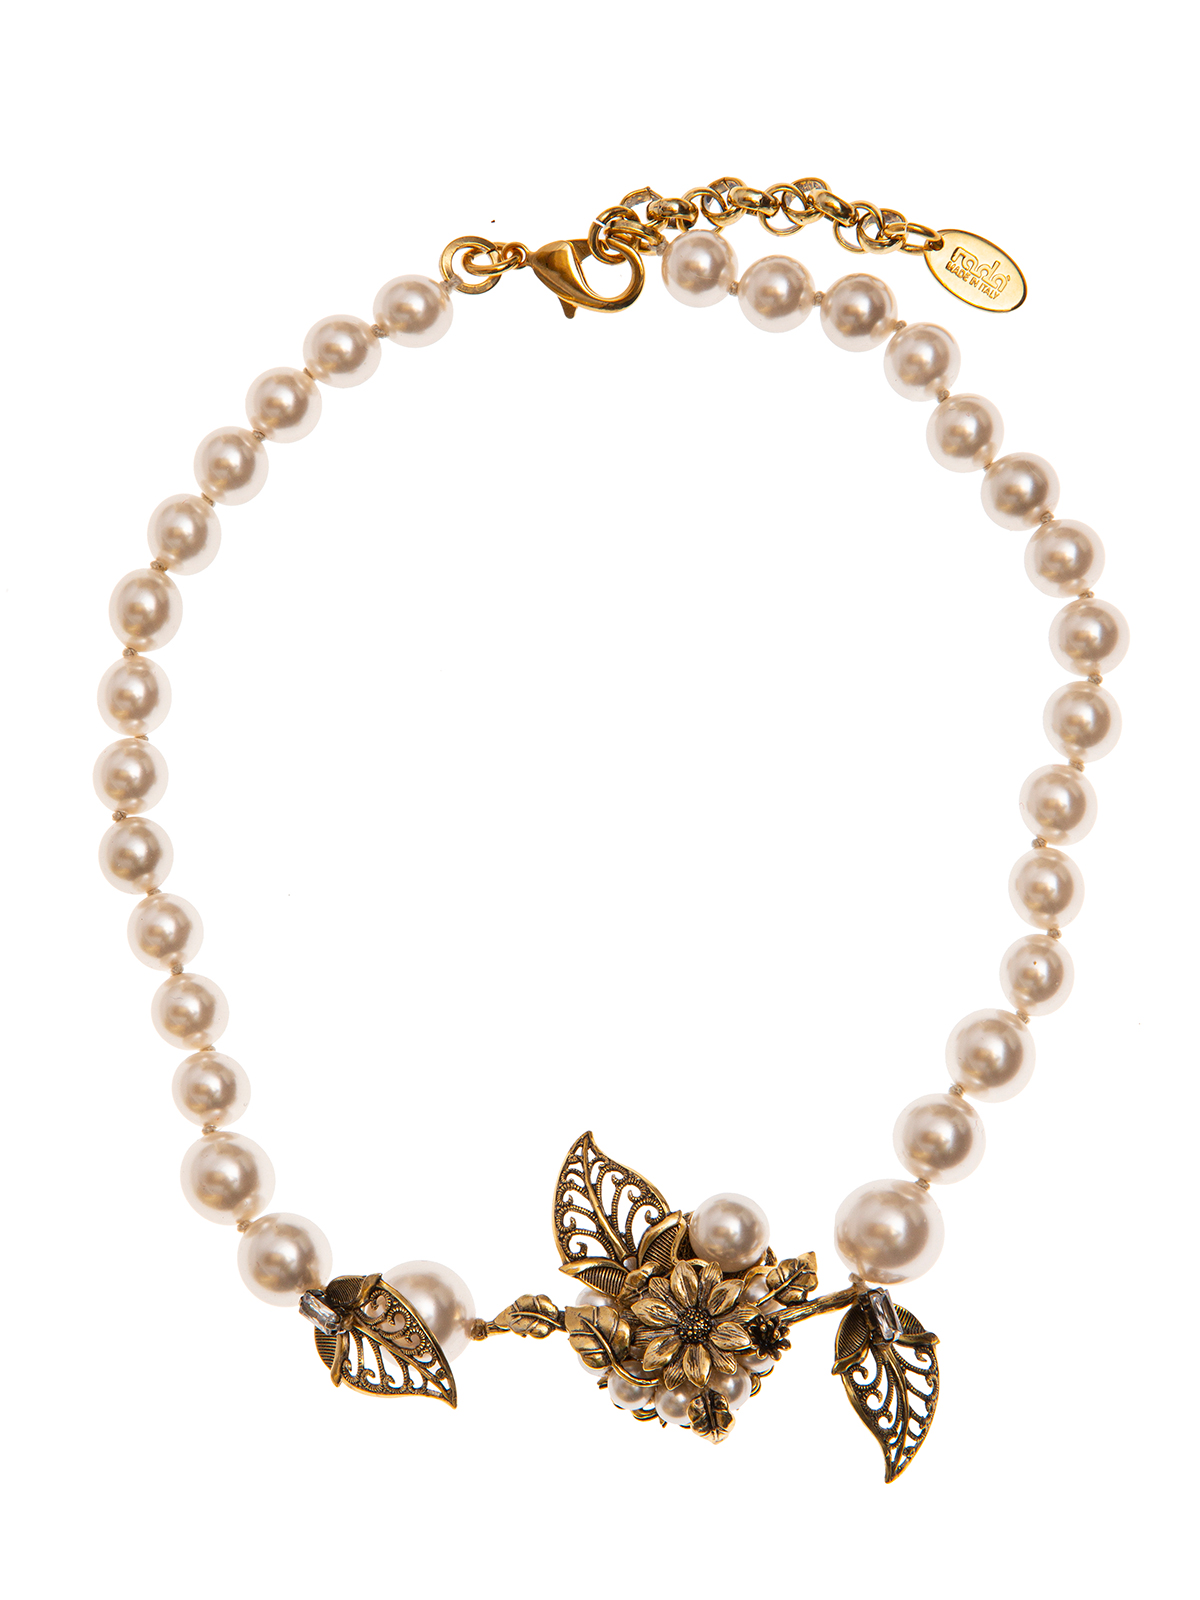 Pearl necklace with central brass flower decoration